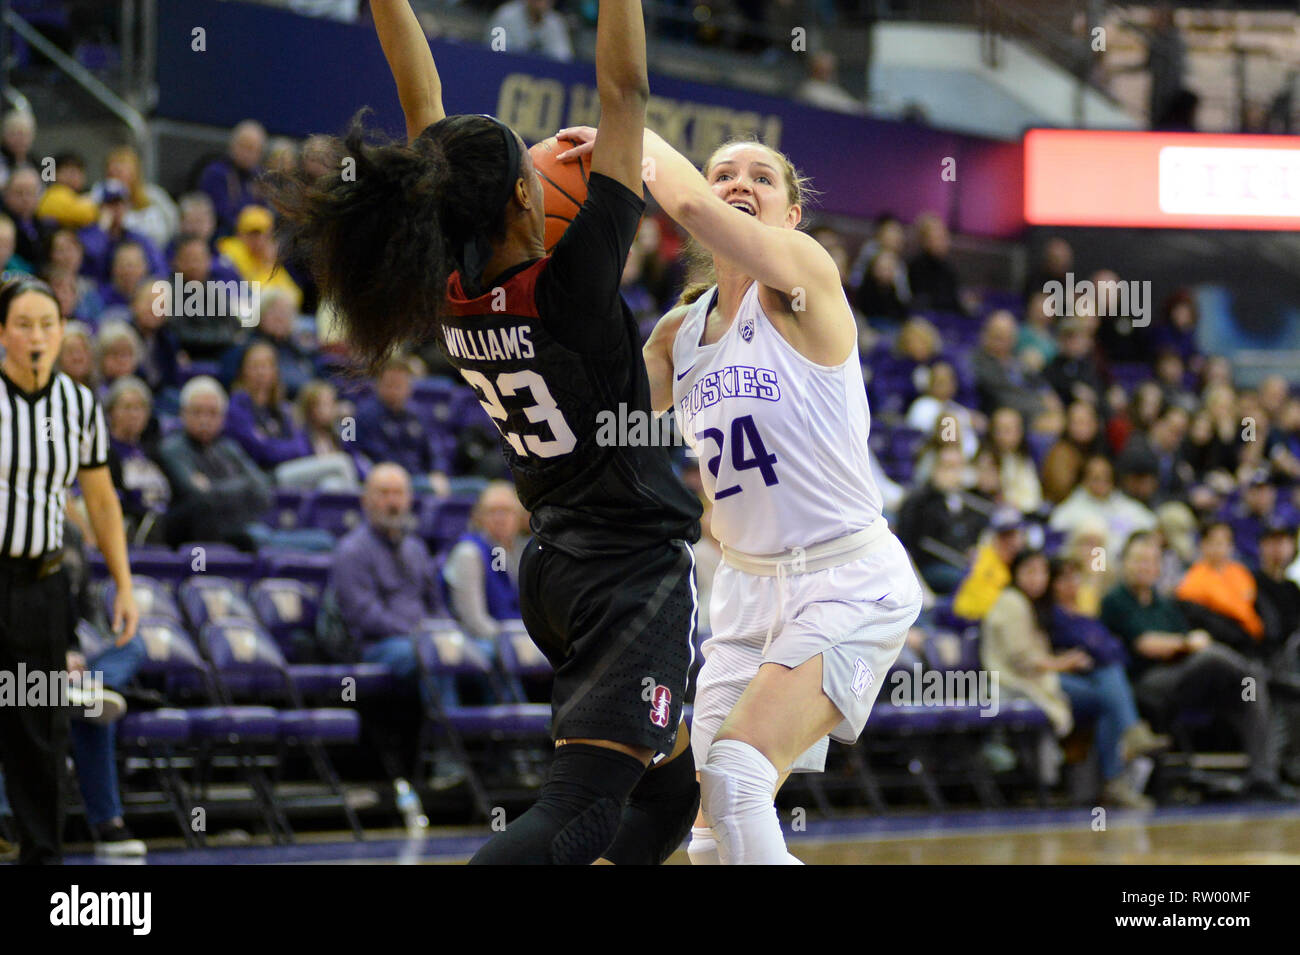 Seattle, WA, USA. 3rd Feb, 2019. KIANA WILLIAMS (23) defends against UW guard JENNA MOSER (24) in a PAC12 womens basketball game between the Washington Huskies and Stanford. The game was played at Hec Ed Pavilion in Seattle, WA. Jeff Halstead/CSM/Alamy Live News Stock Photo